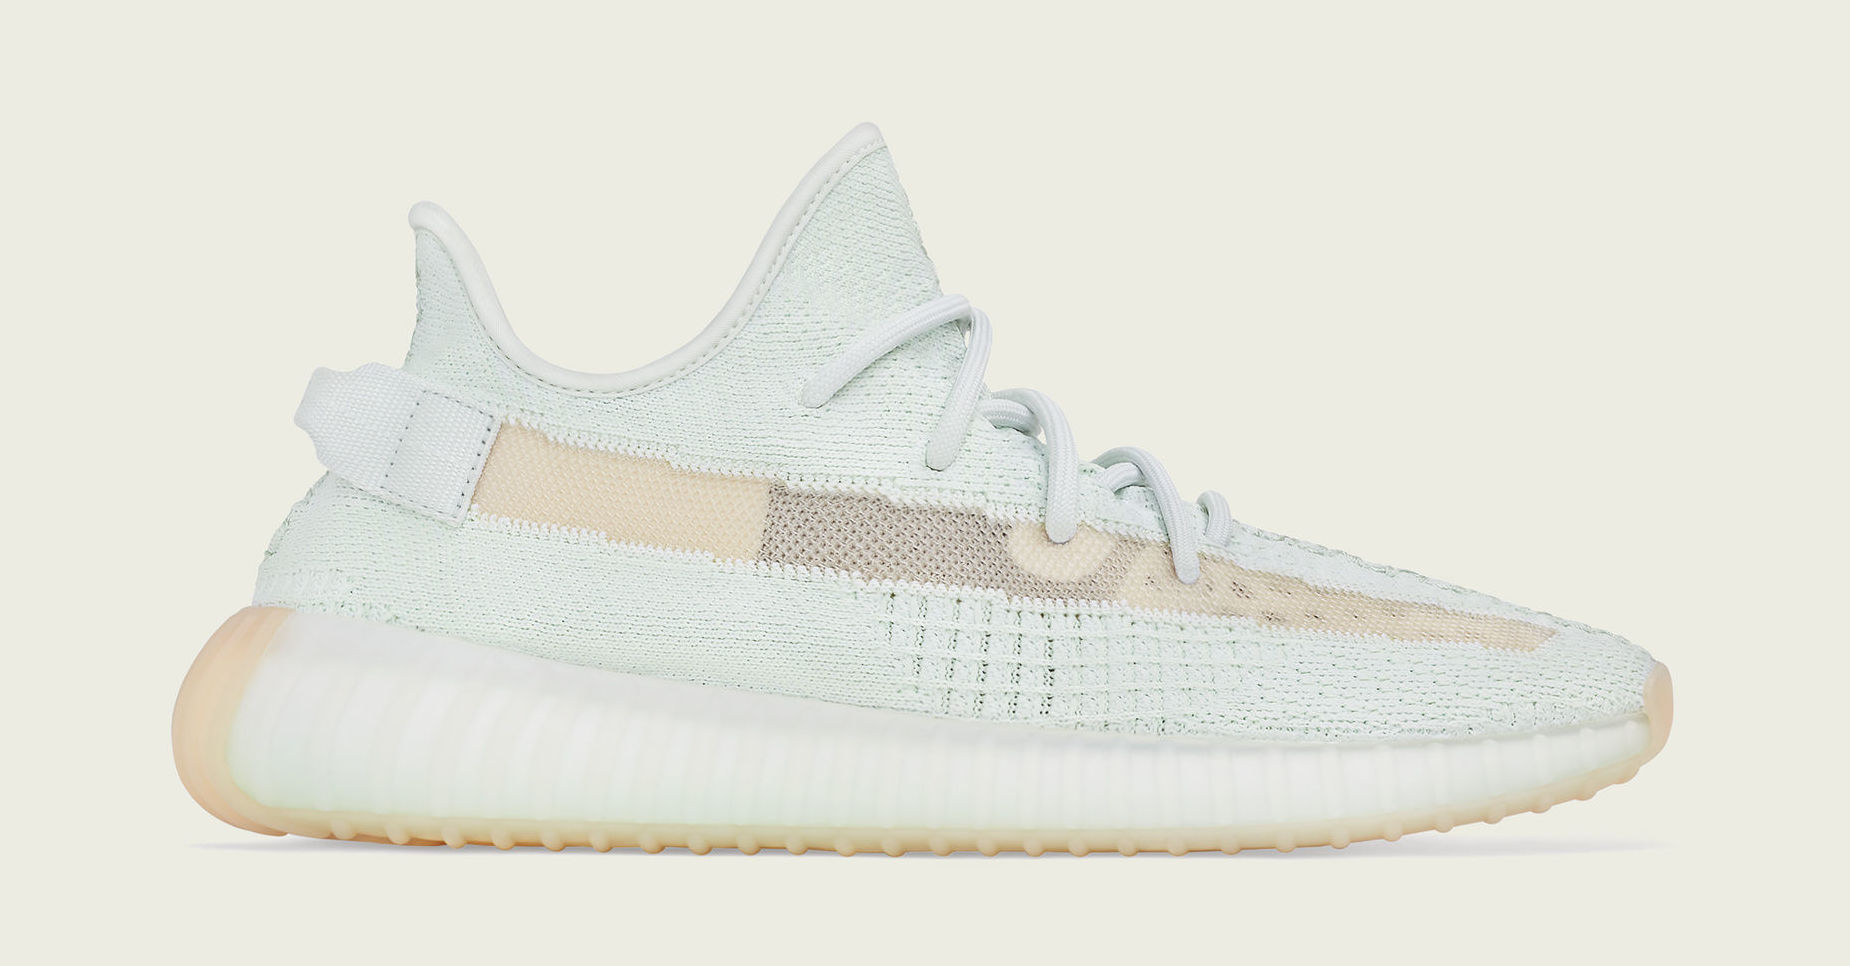 Adidas Yeezy Boost 350 V2 &#x27;Hyperspace&#x27; EG7491 Lateral